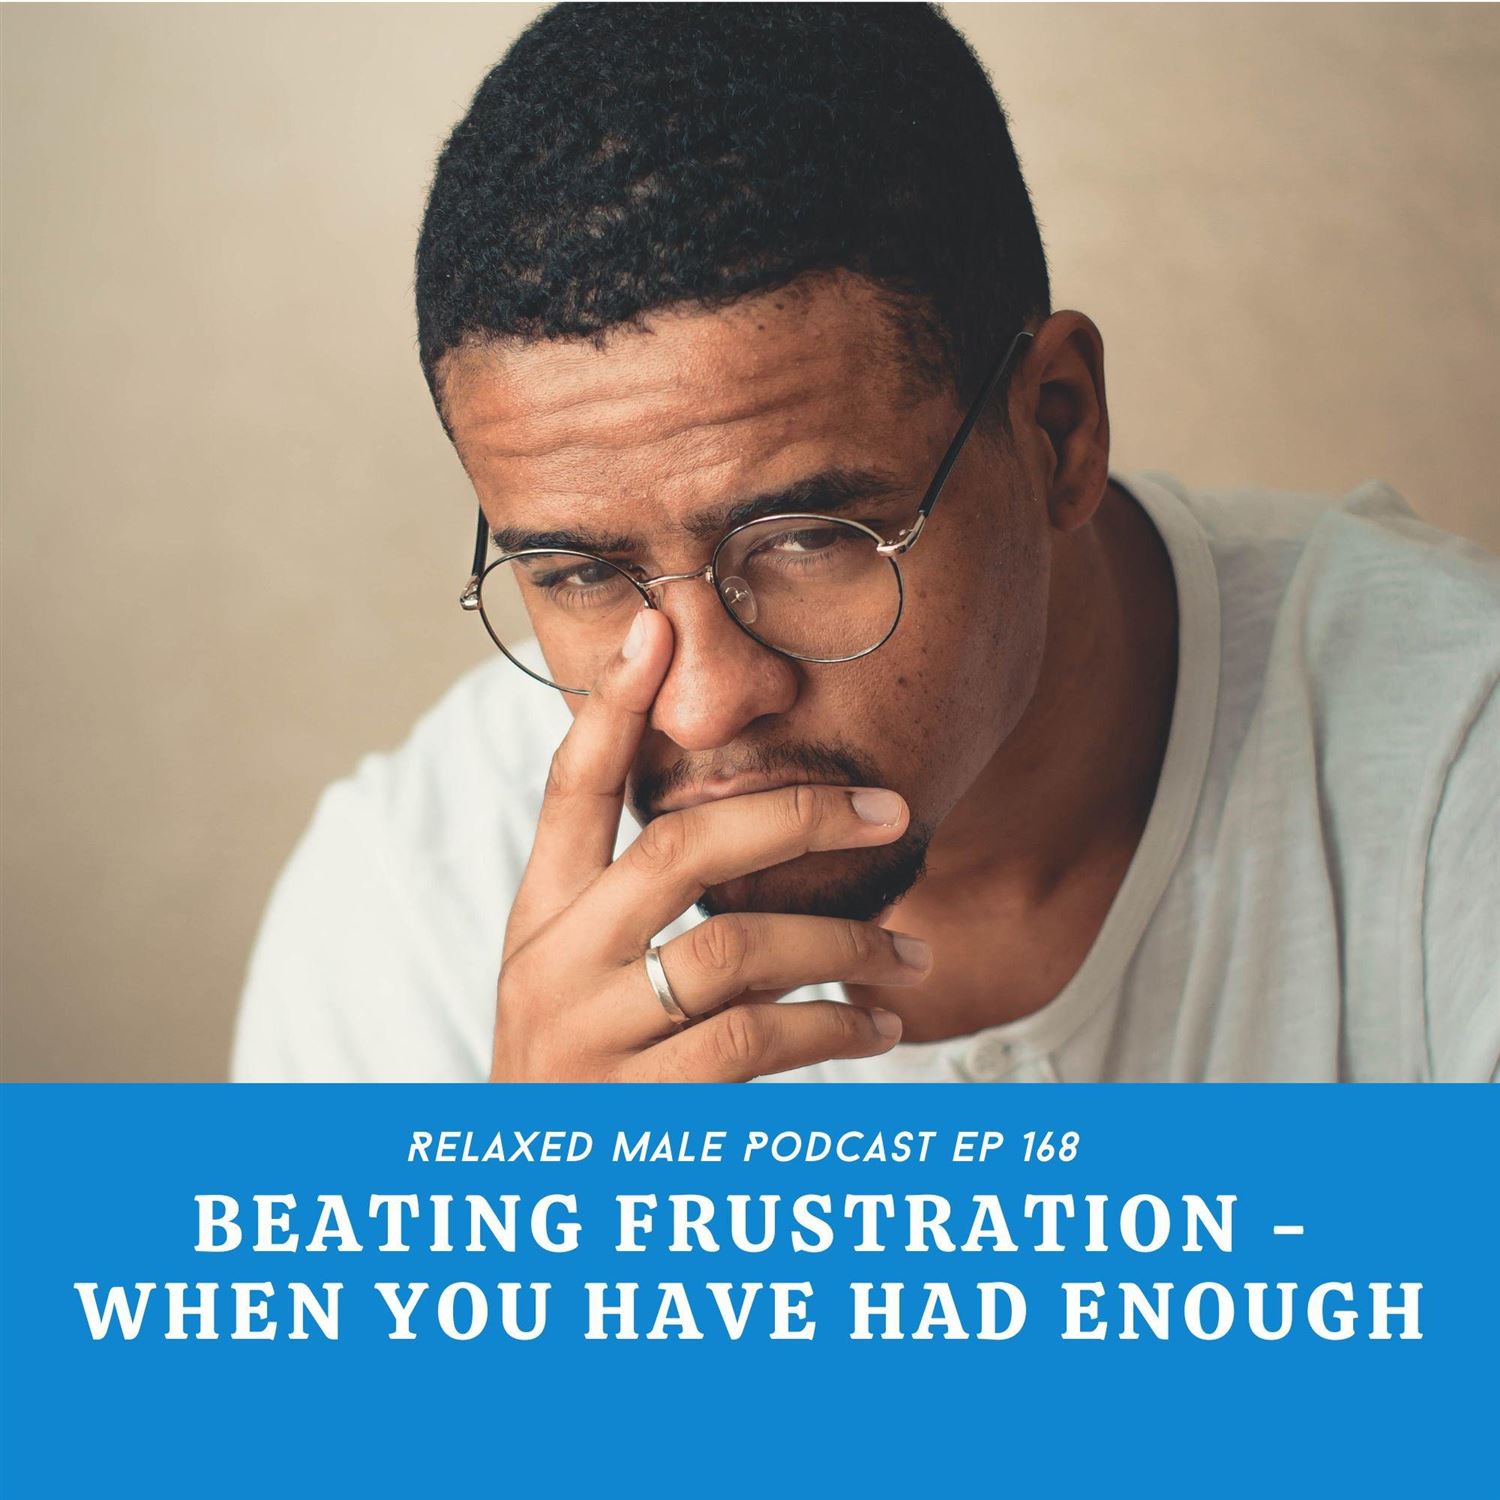 Beating Frustration - When You Have Had Enough